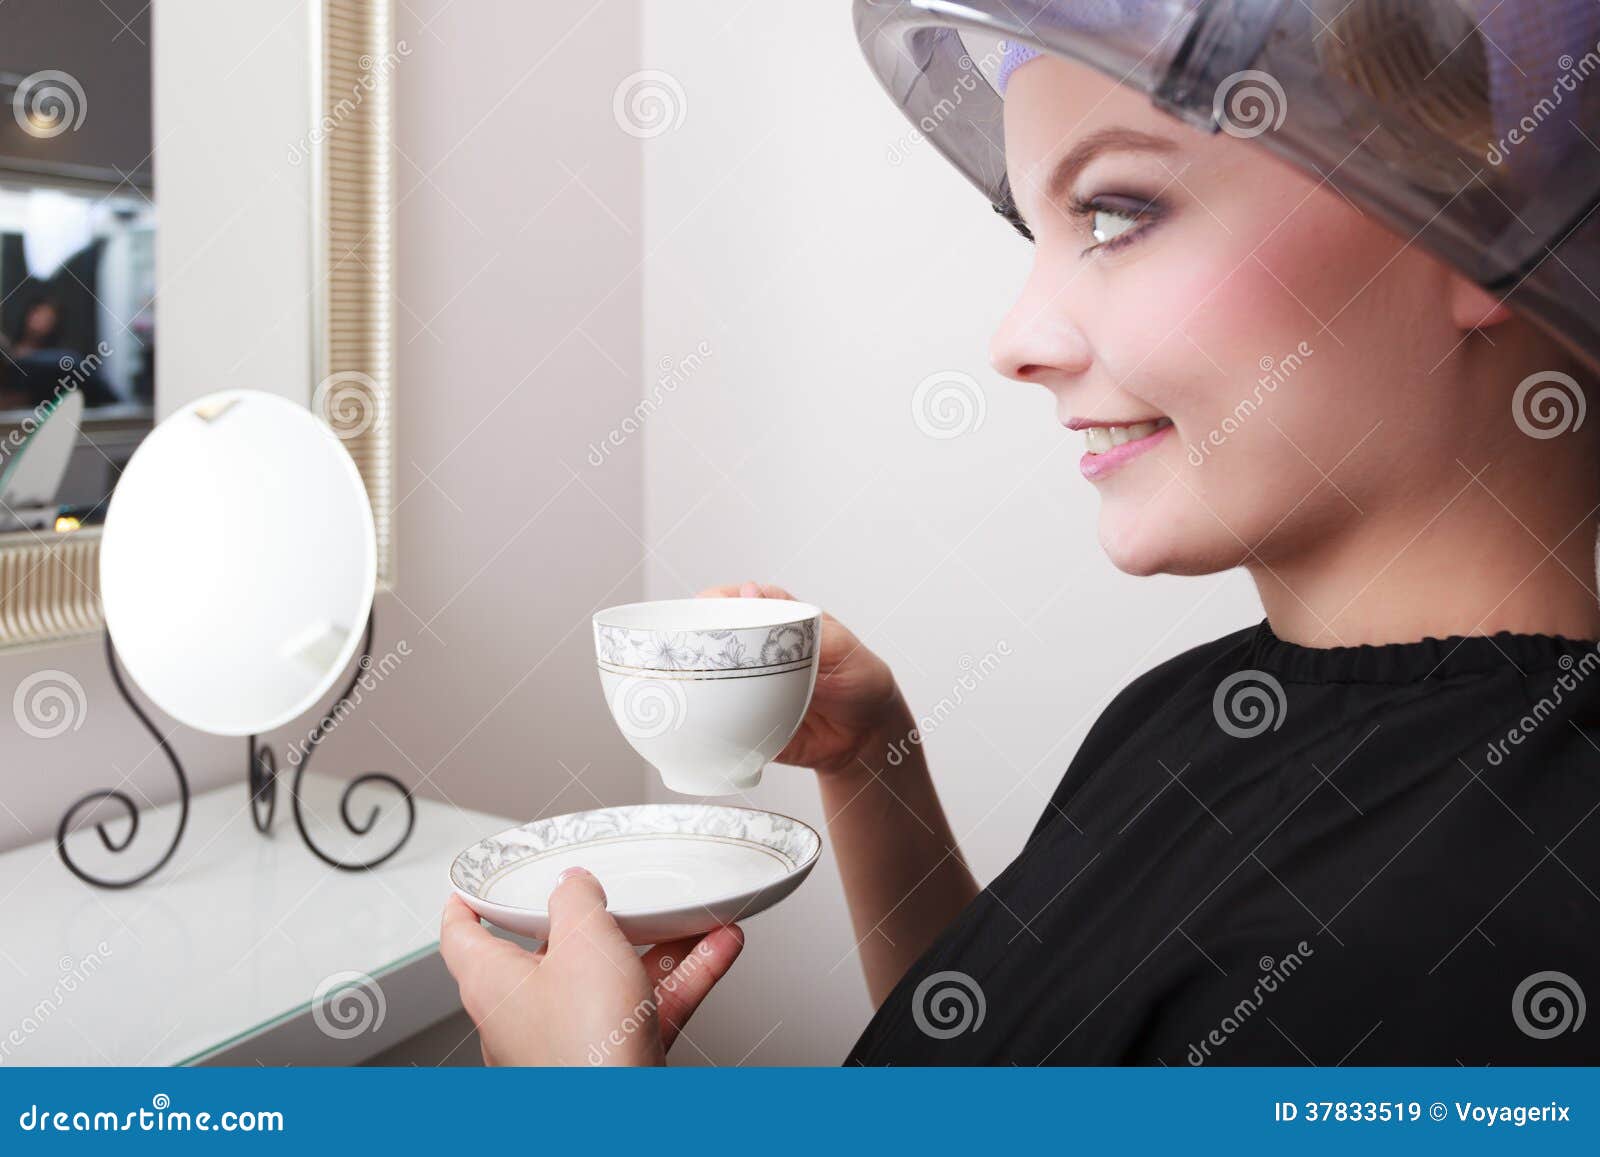 Woman Client Drinking Coffee Tea In Hairdressing Salon 